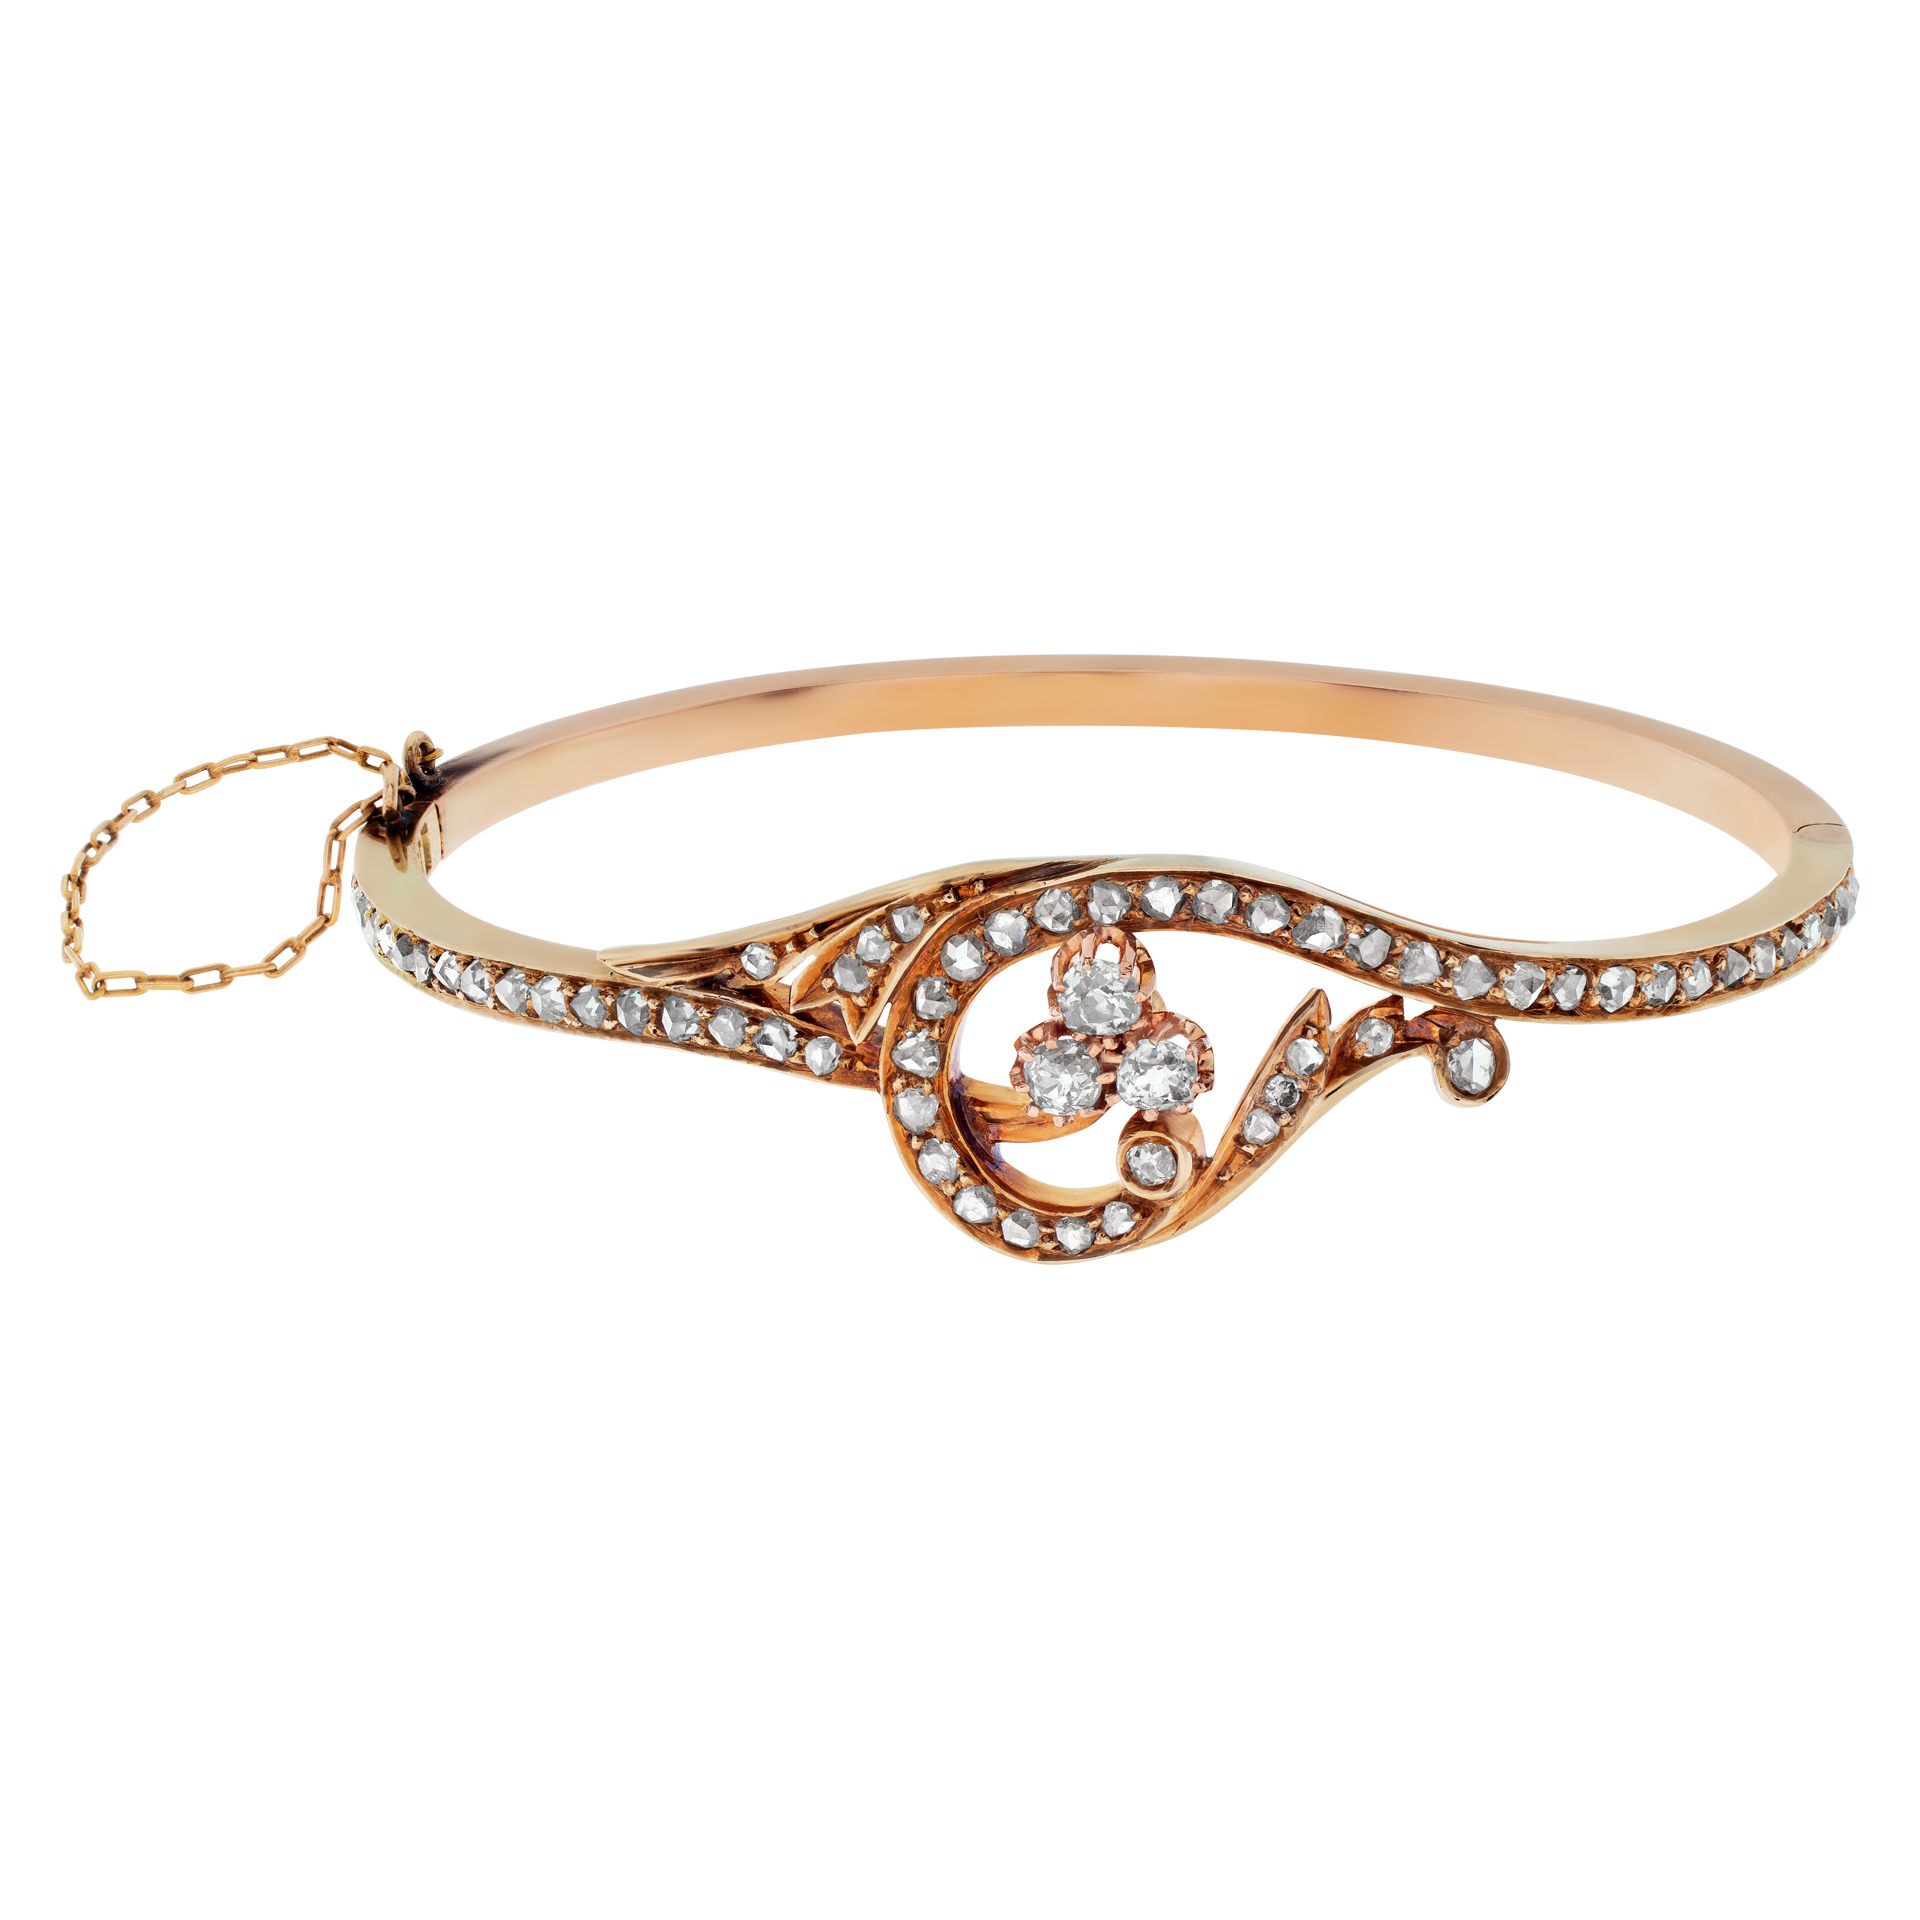 Edwardian bangle with rose cut diamonds set in 14K rose gold. Will fit up to to 7.25 size wrist. st. image 1